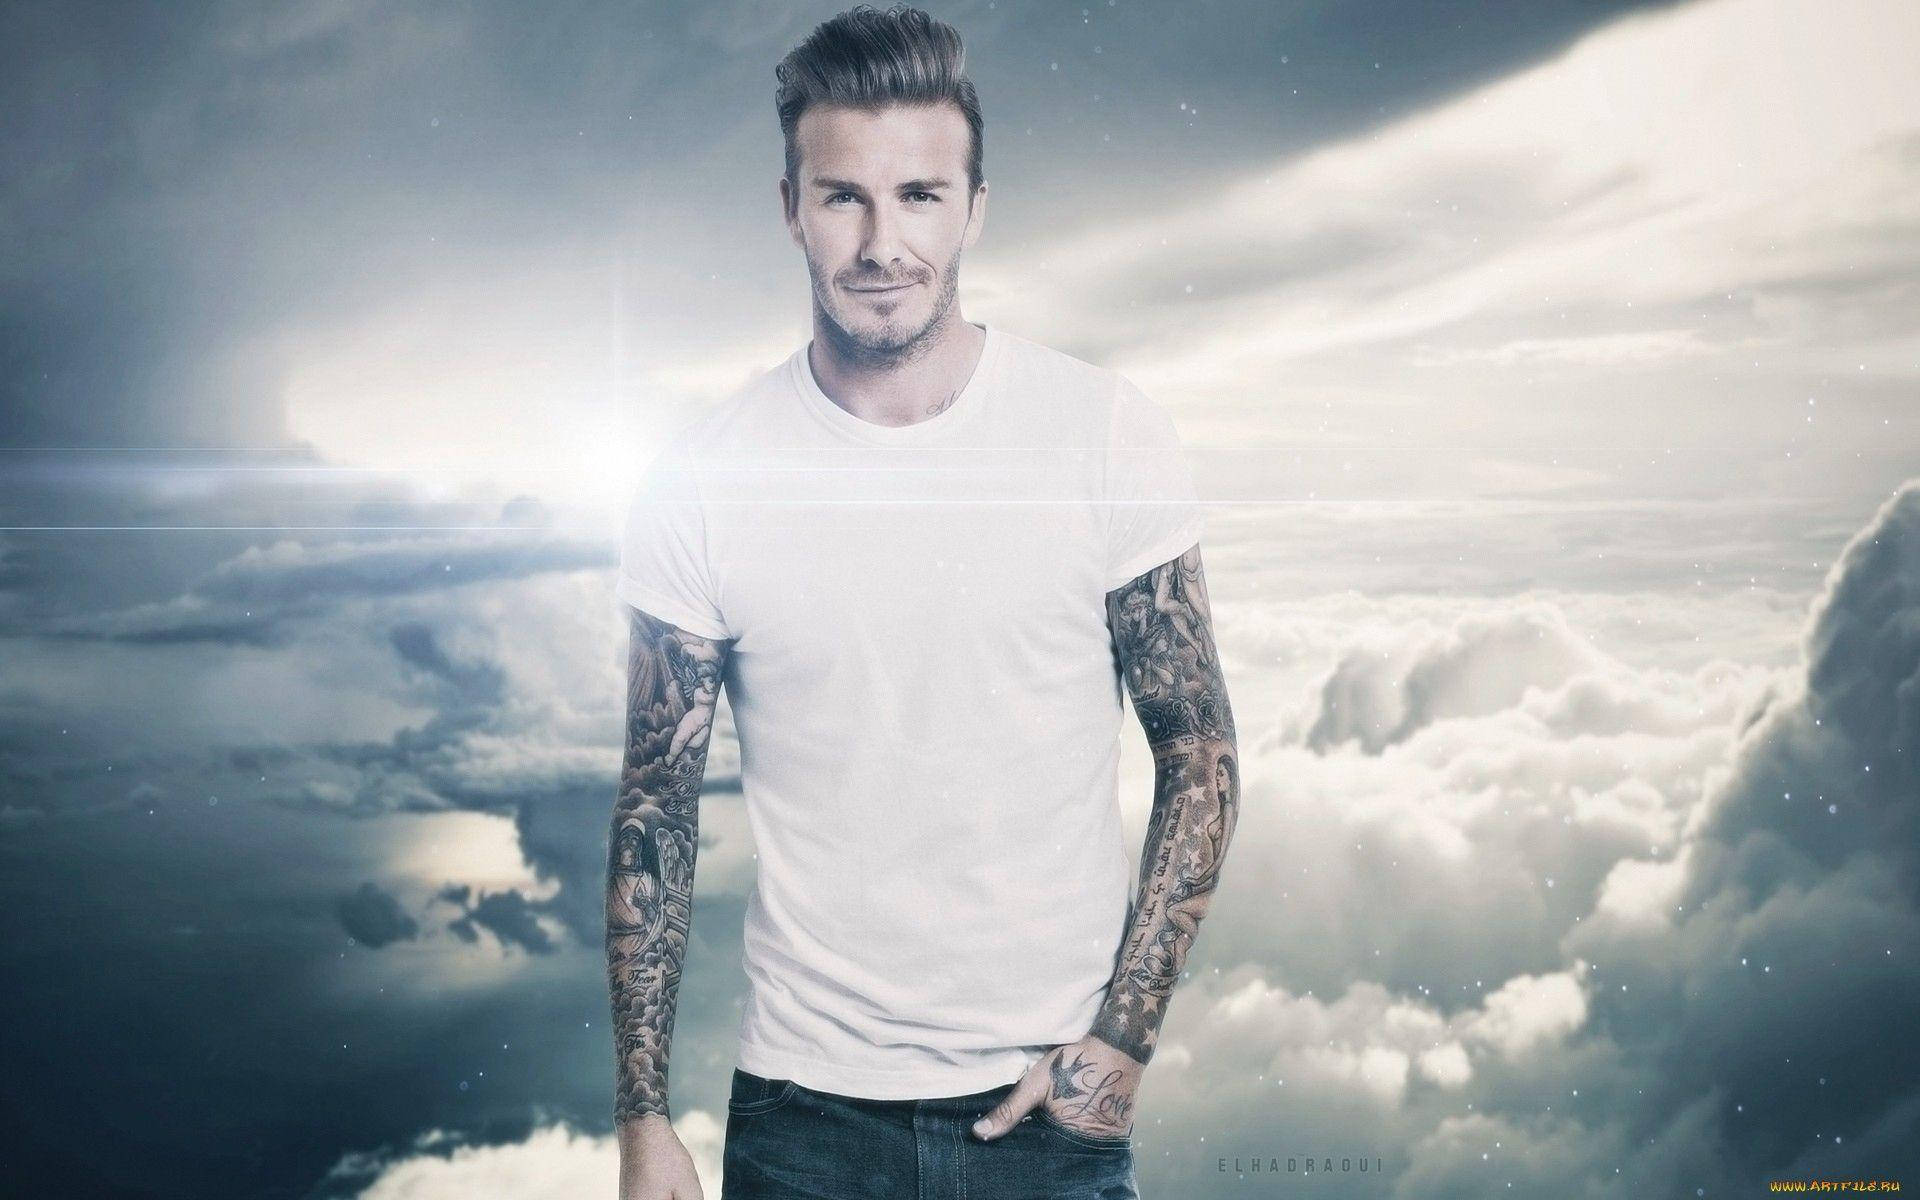 David Beckham Shows Off His Iconic Tattoos Background